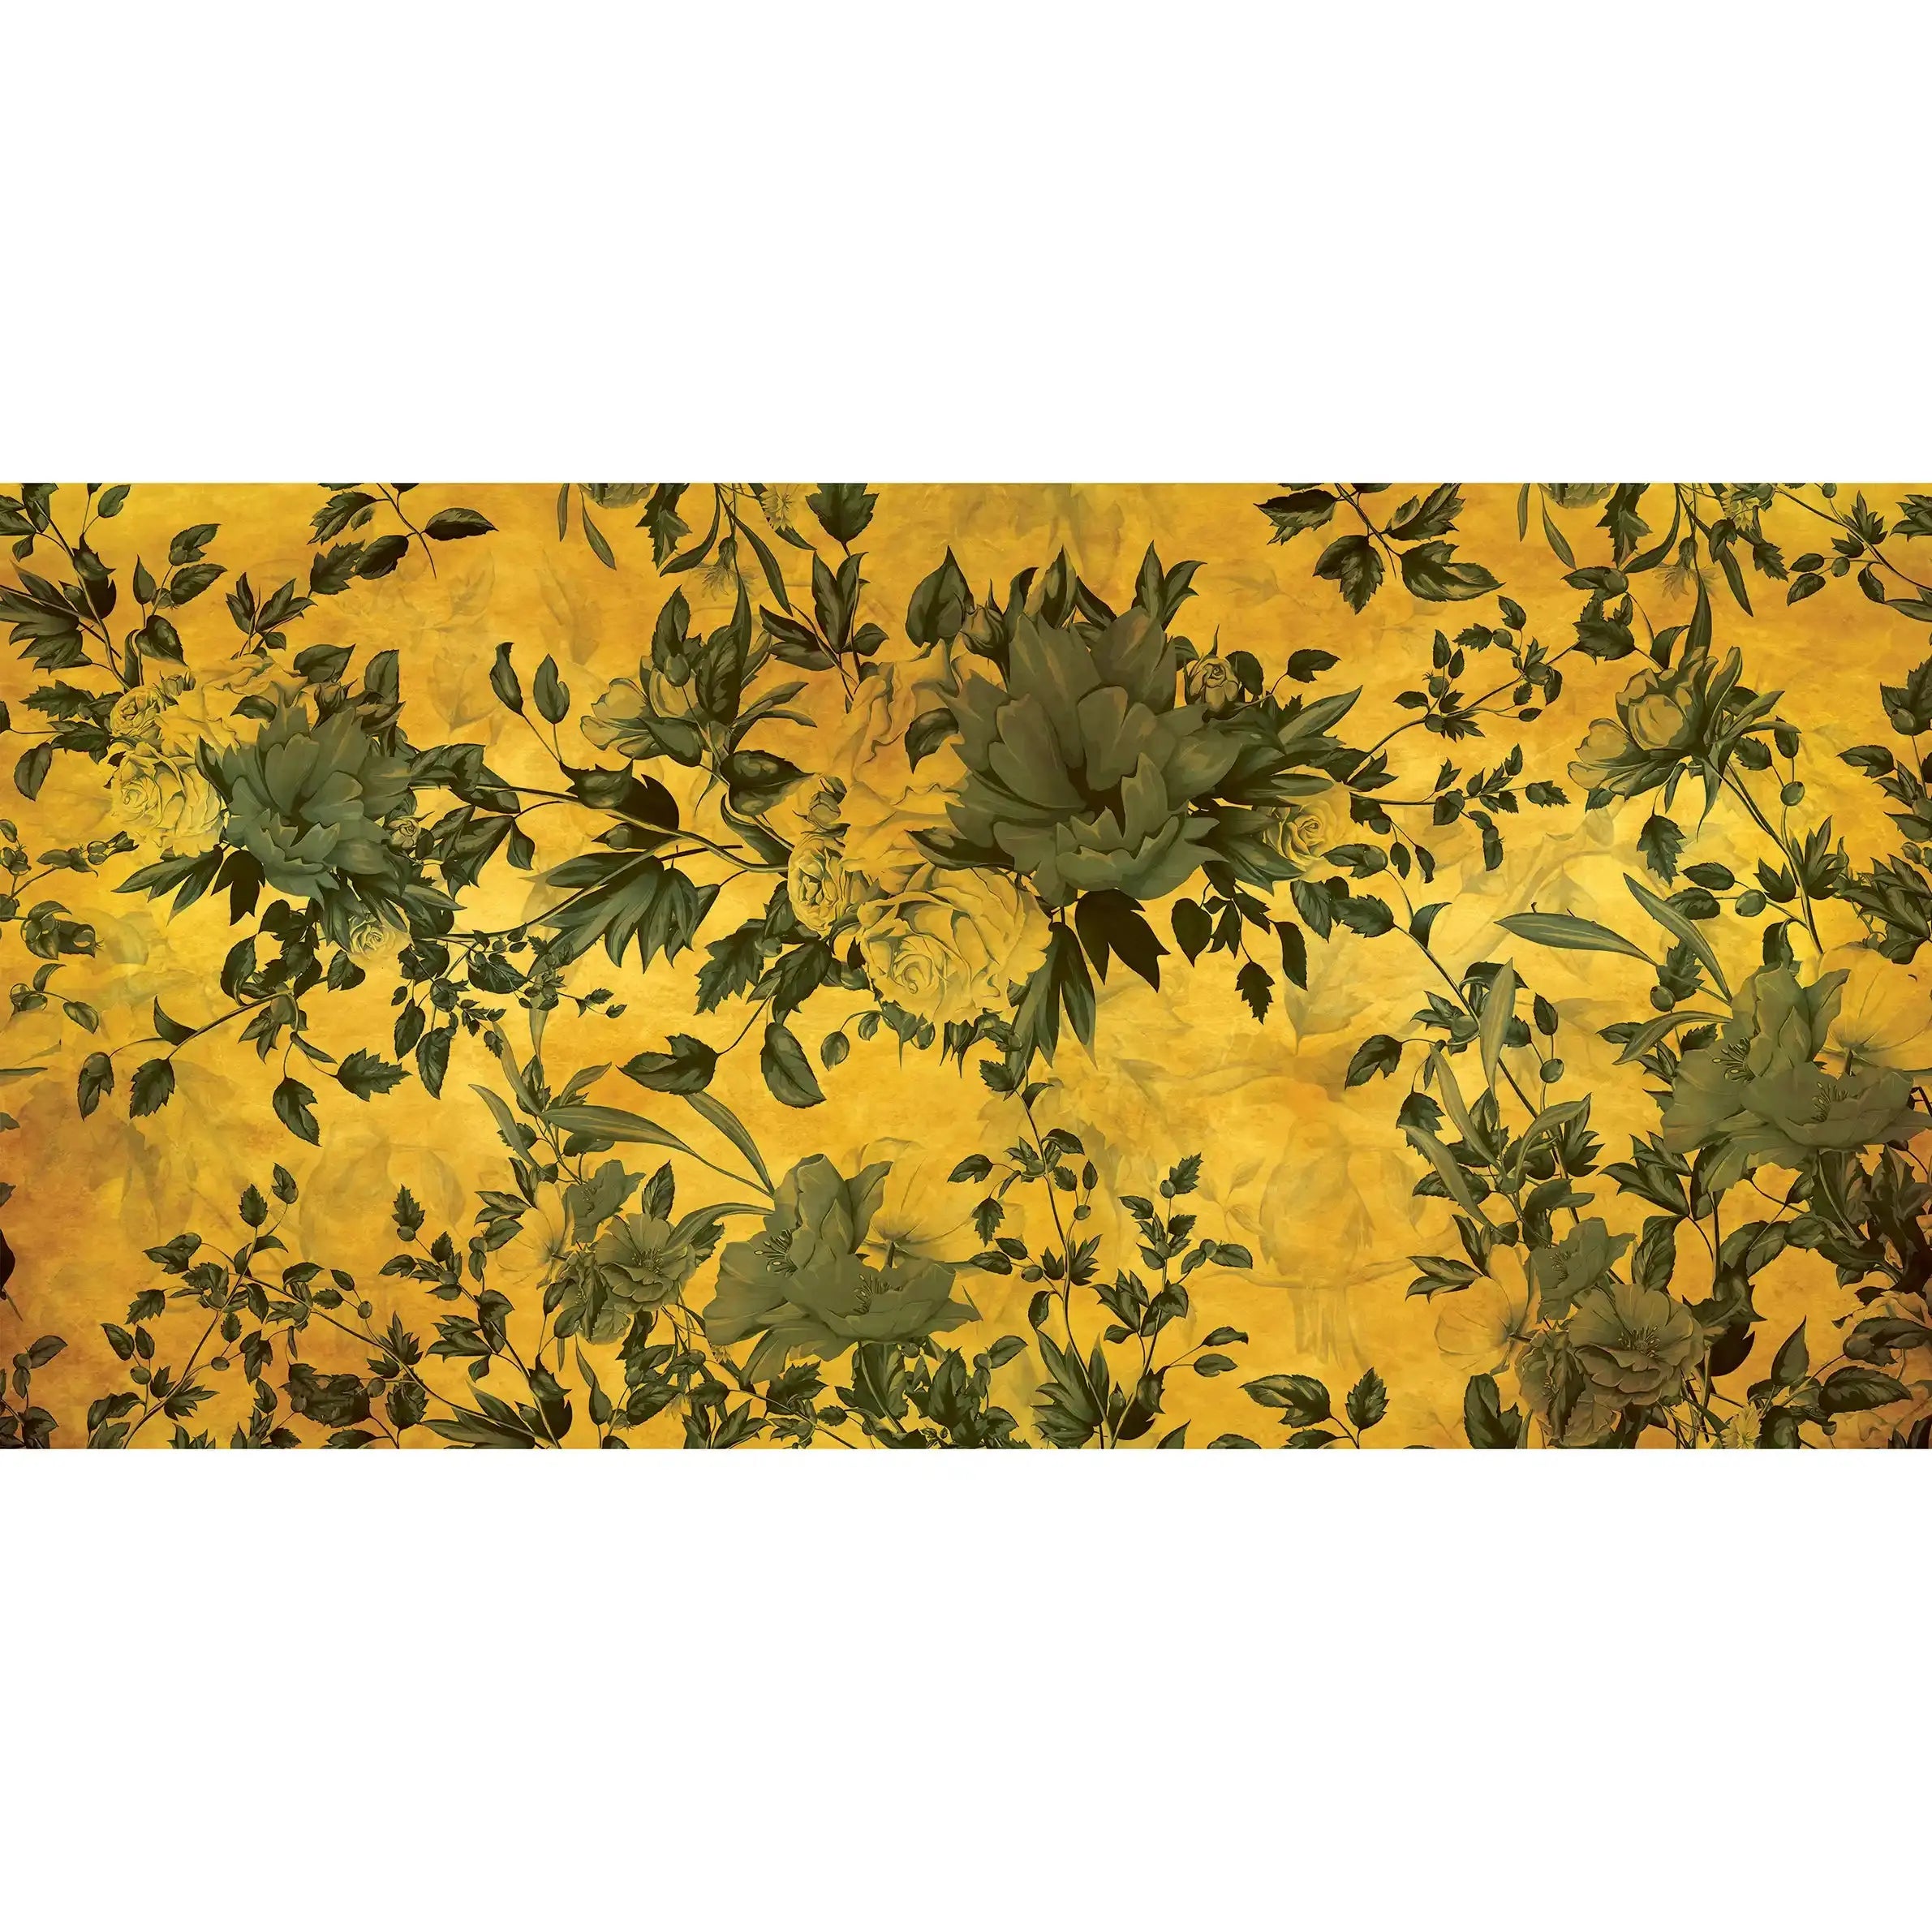 3045-F / Peel and Stick Wallpaper Floral - Large Dark Green Flowers Design, Adhesive Decorative Paper for Bedroom, Kitchen, and Bathroom - Artevella